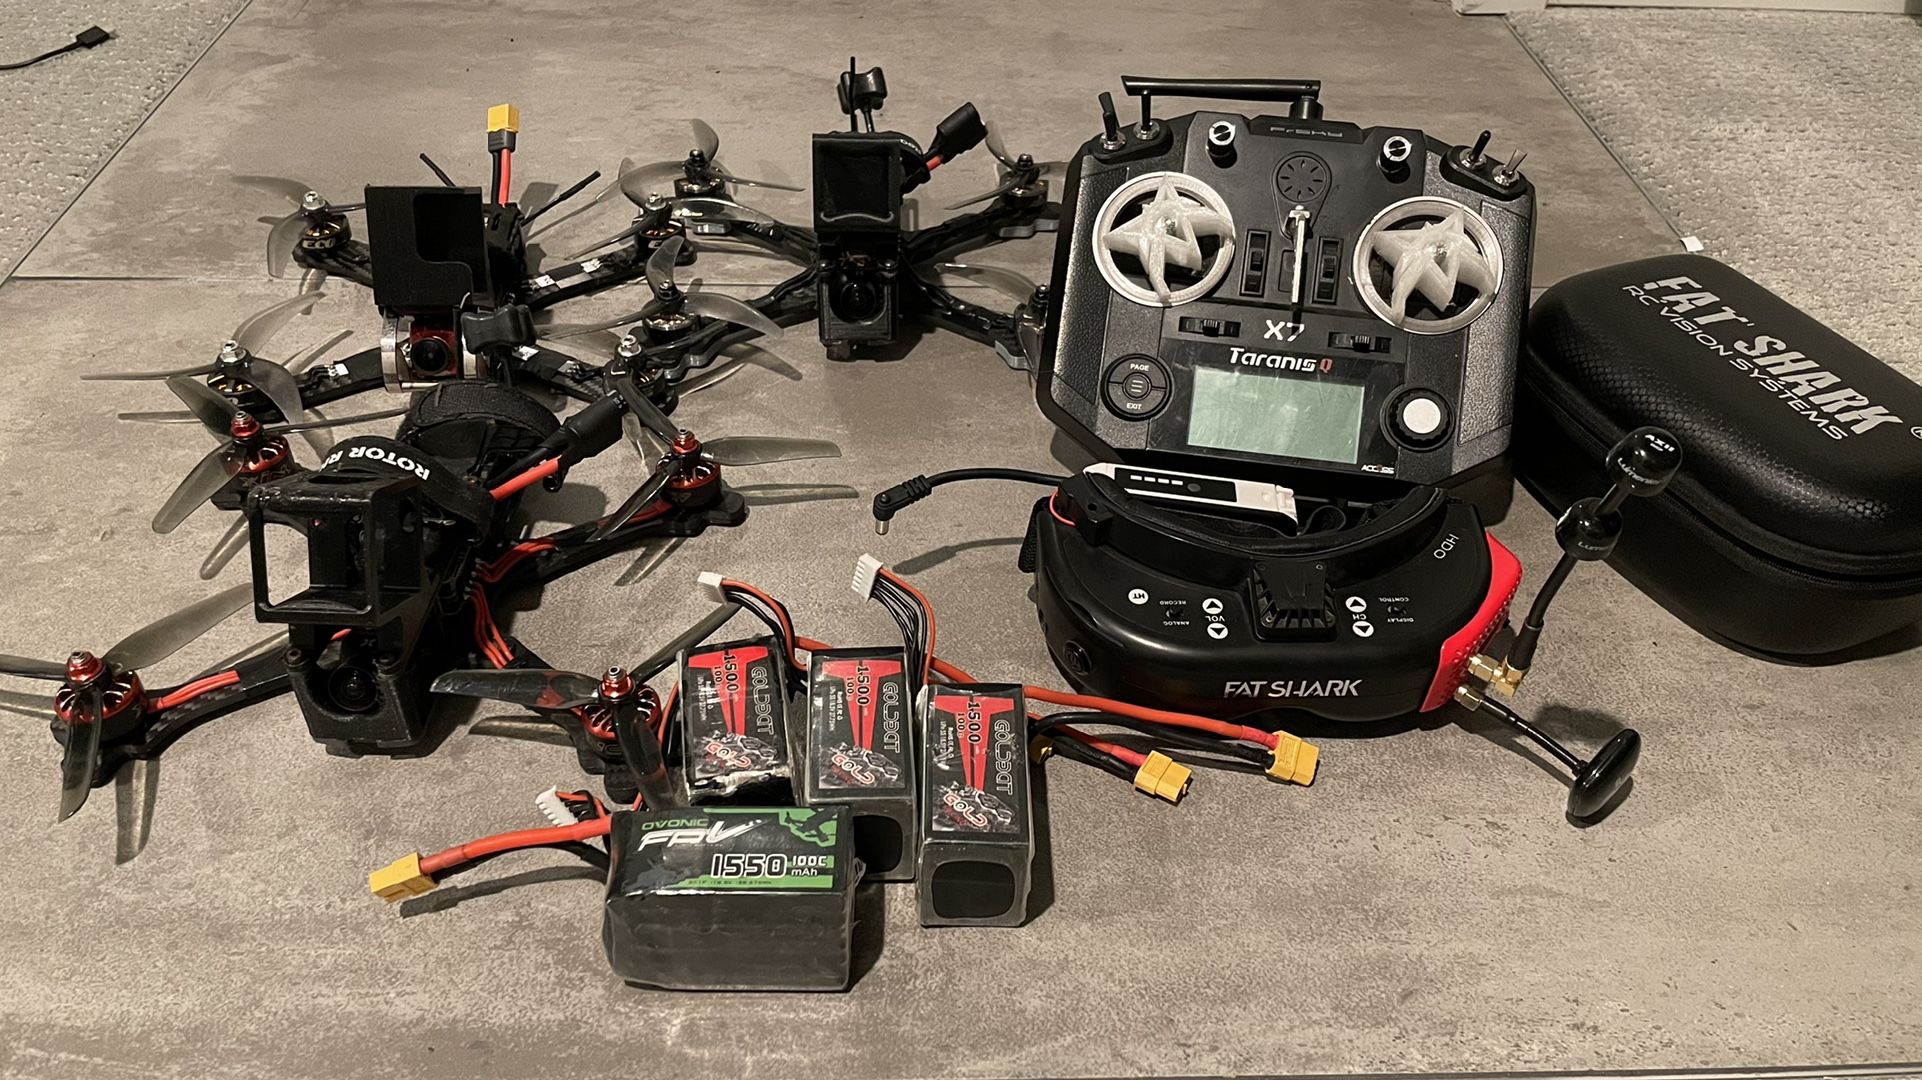 full fpv setup (only two drones for-sale instead of three)